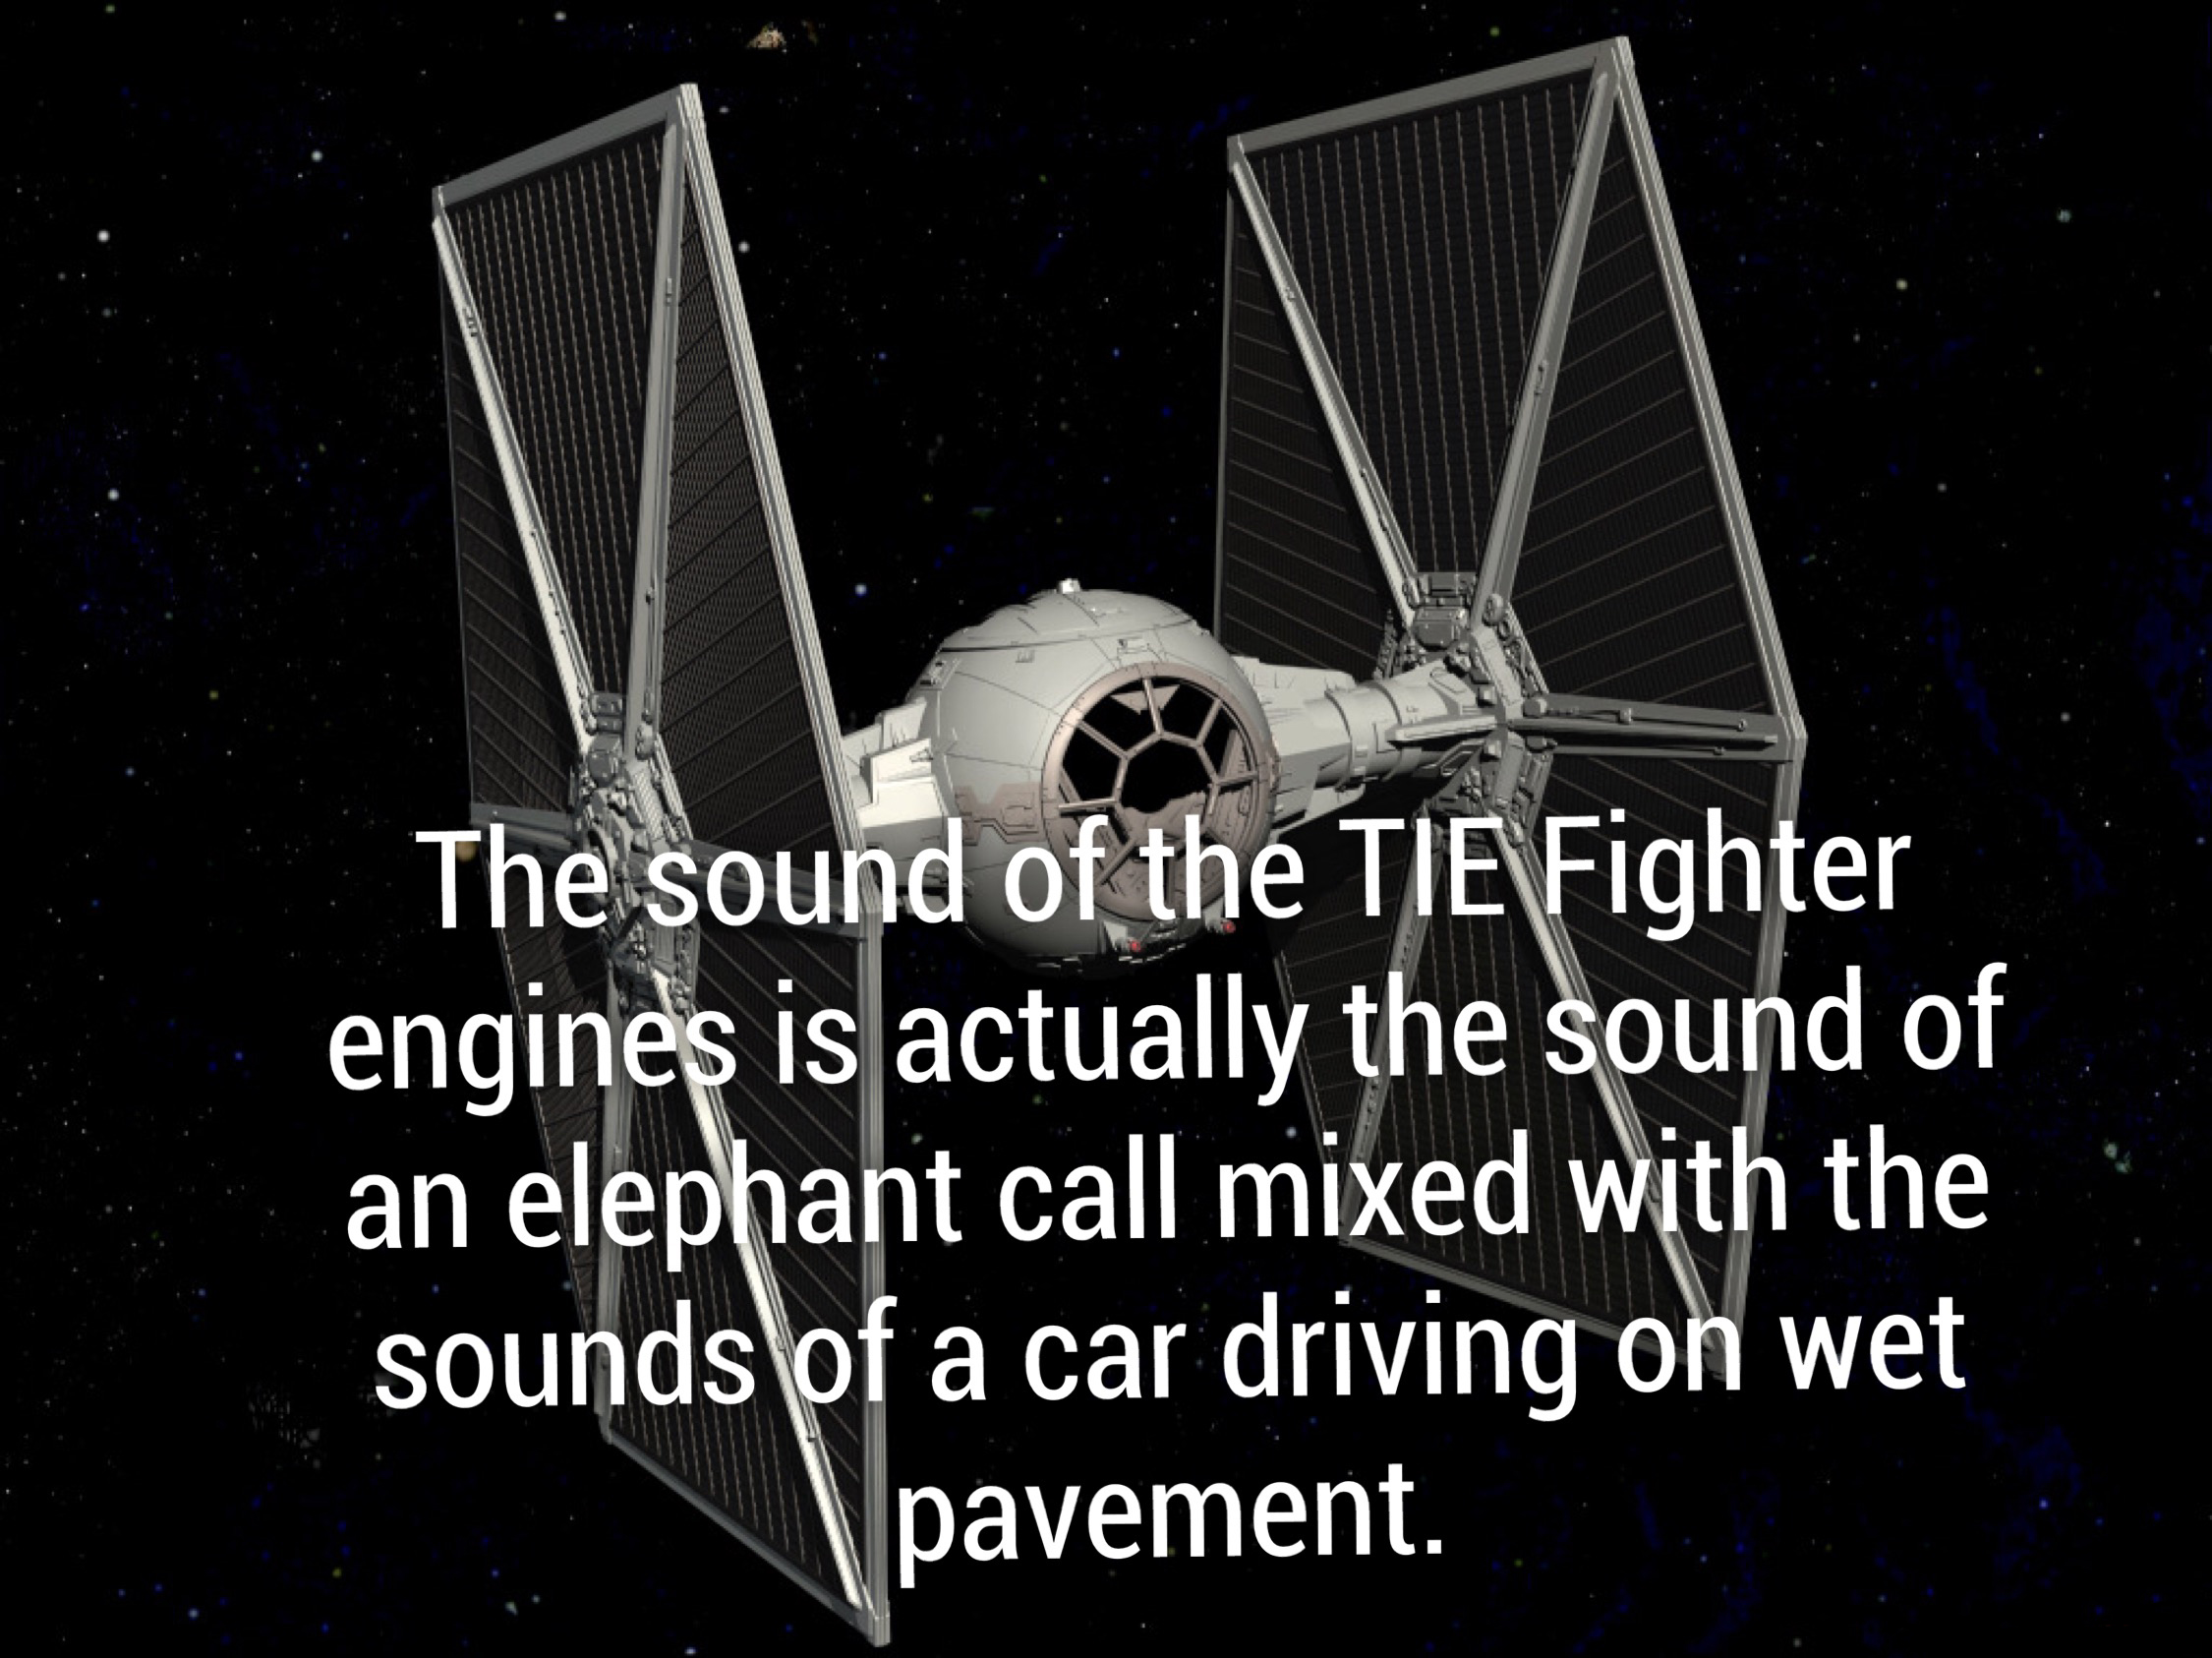 miami heat haters - The sound of the Tie Fighter engines is actually the sound of an elephant call mixed with the sounds of a car driving on wet pavement.